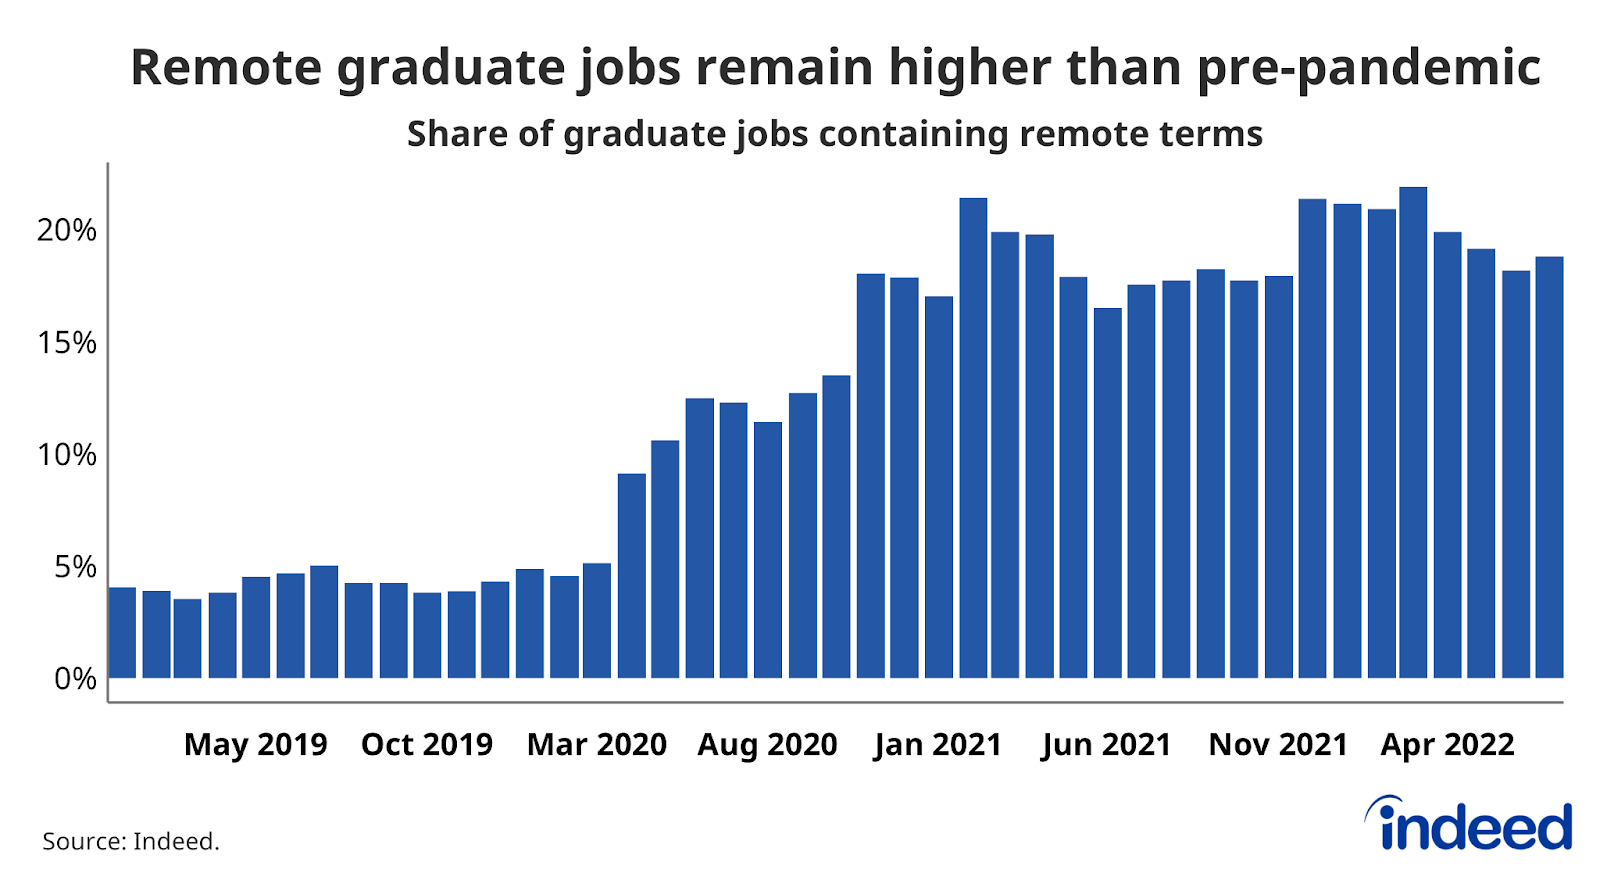 A bar chart titled “Graduate remote share remains higher than pre-pandemic” showing the share of graduate job postings mentioning remote work.